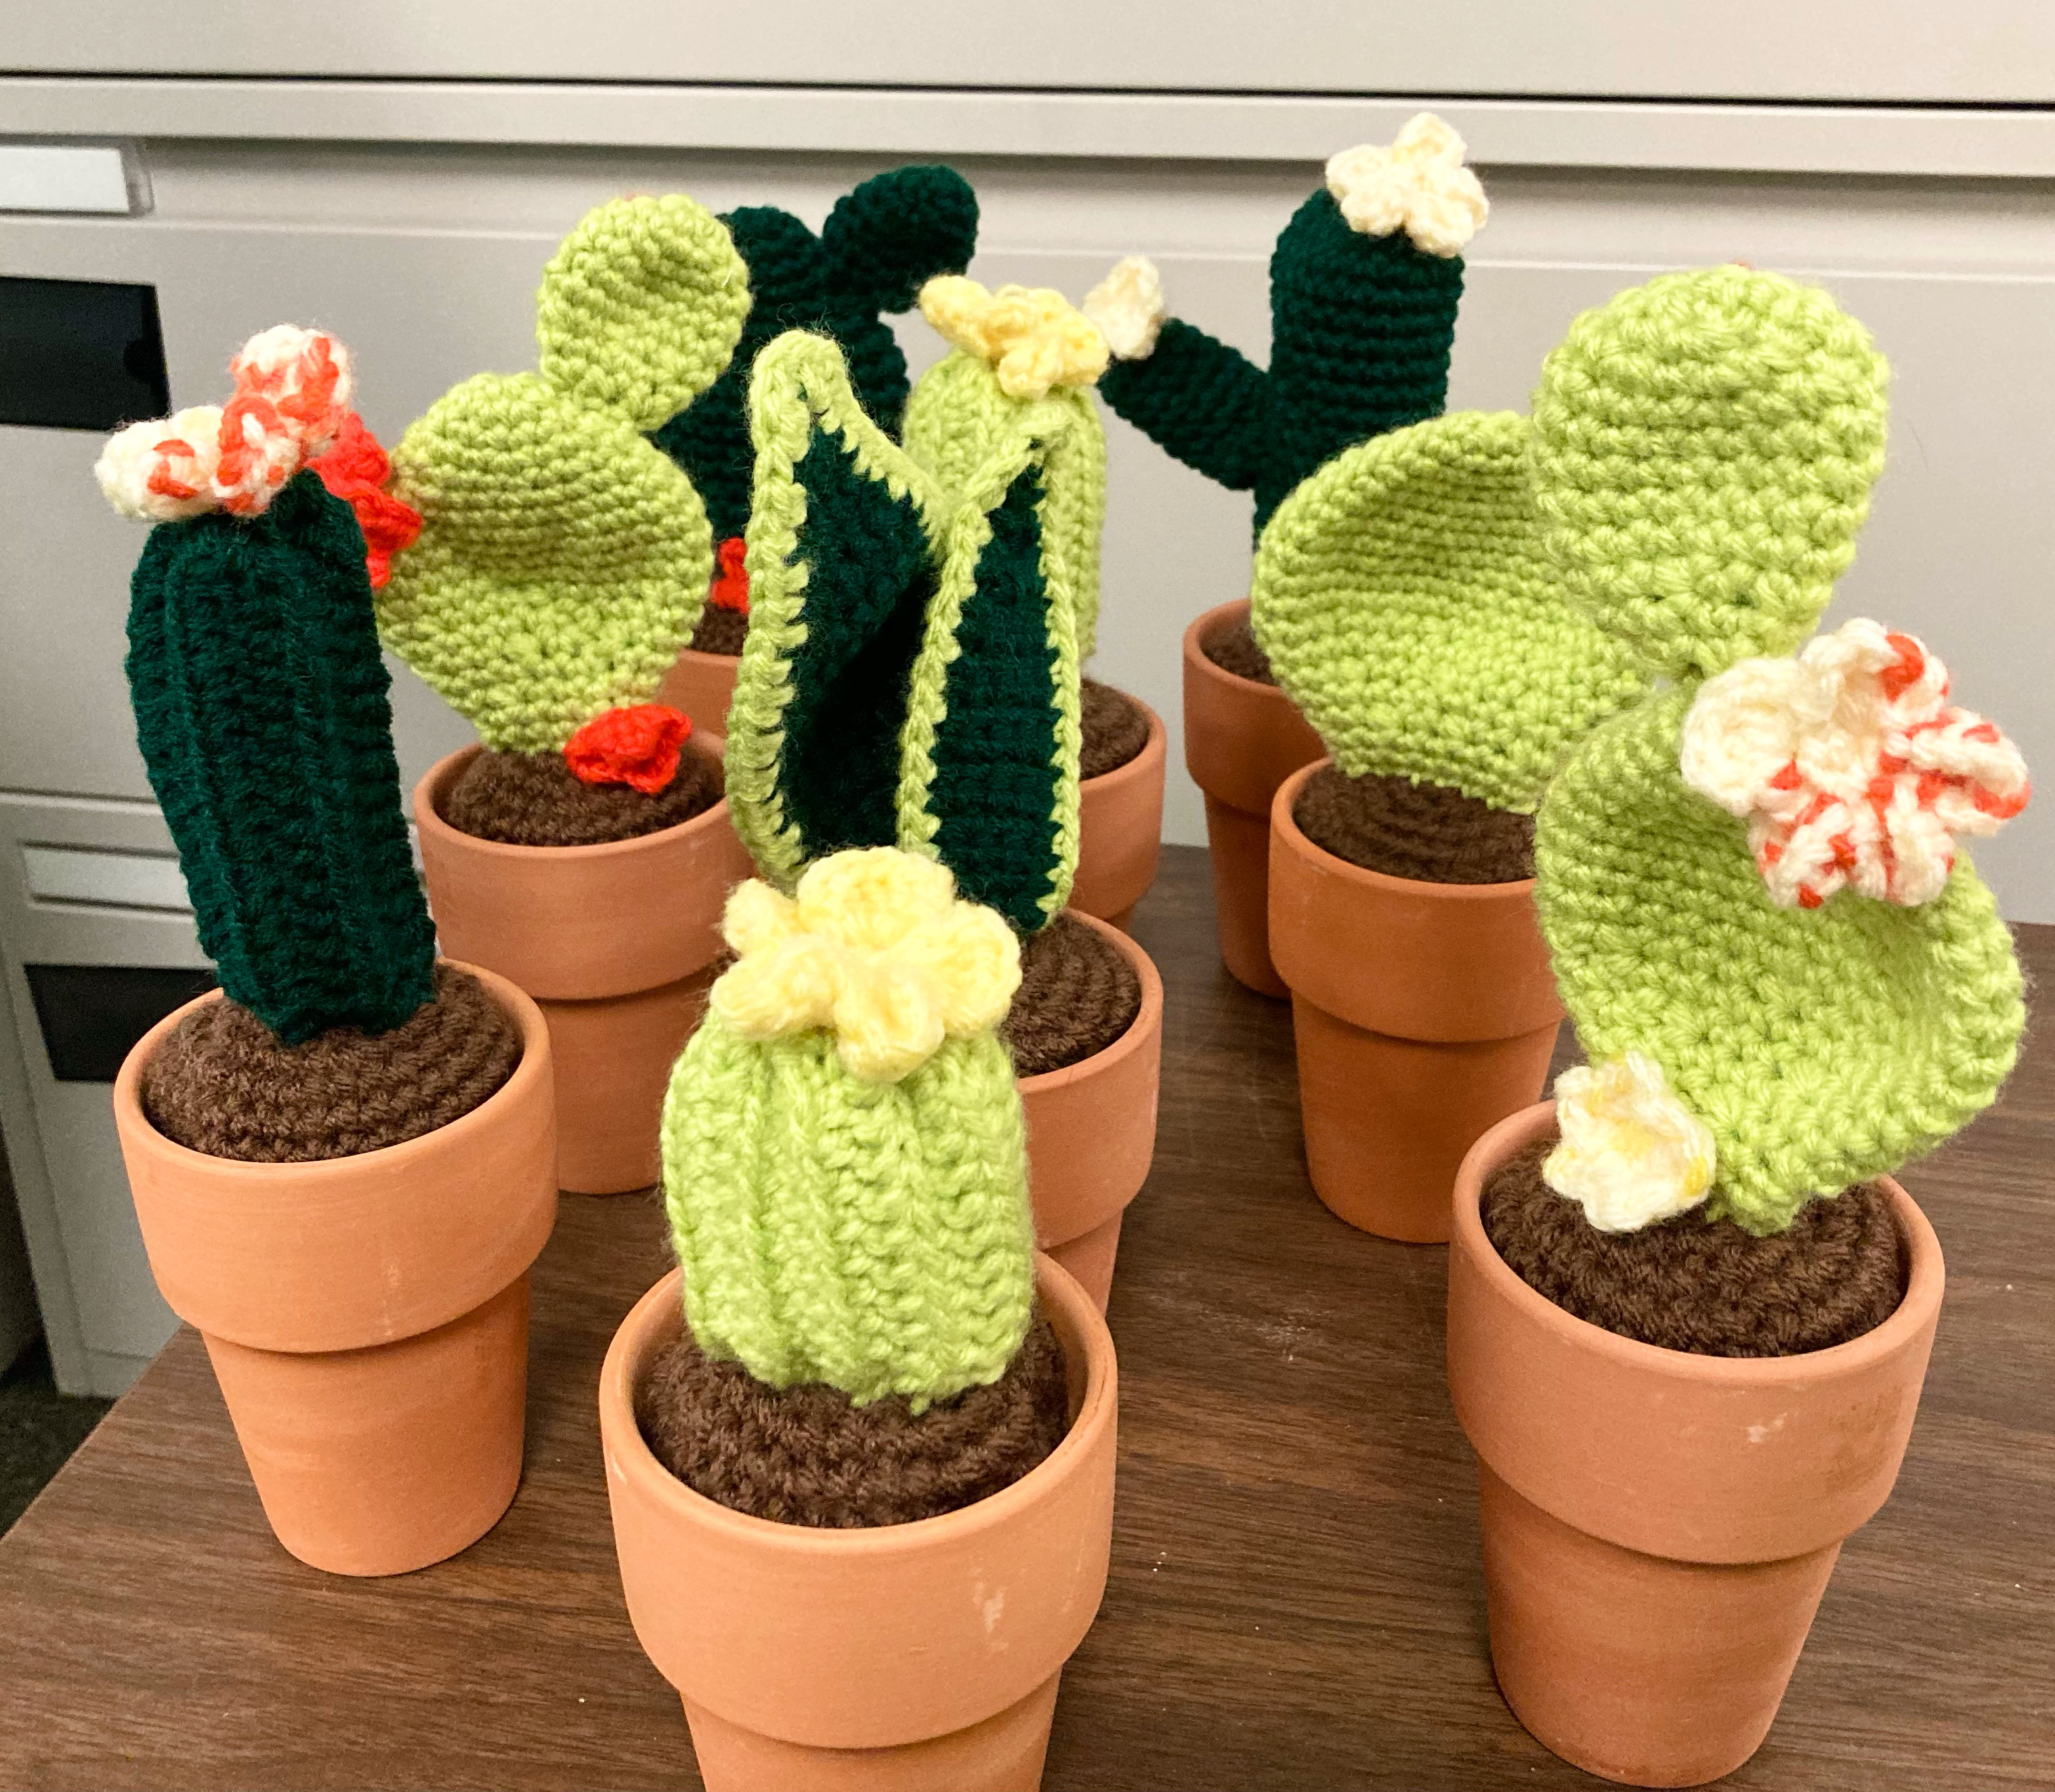 collection of many knitted cactus of different types in tera cota pots